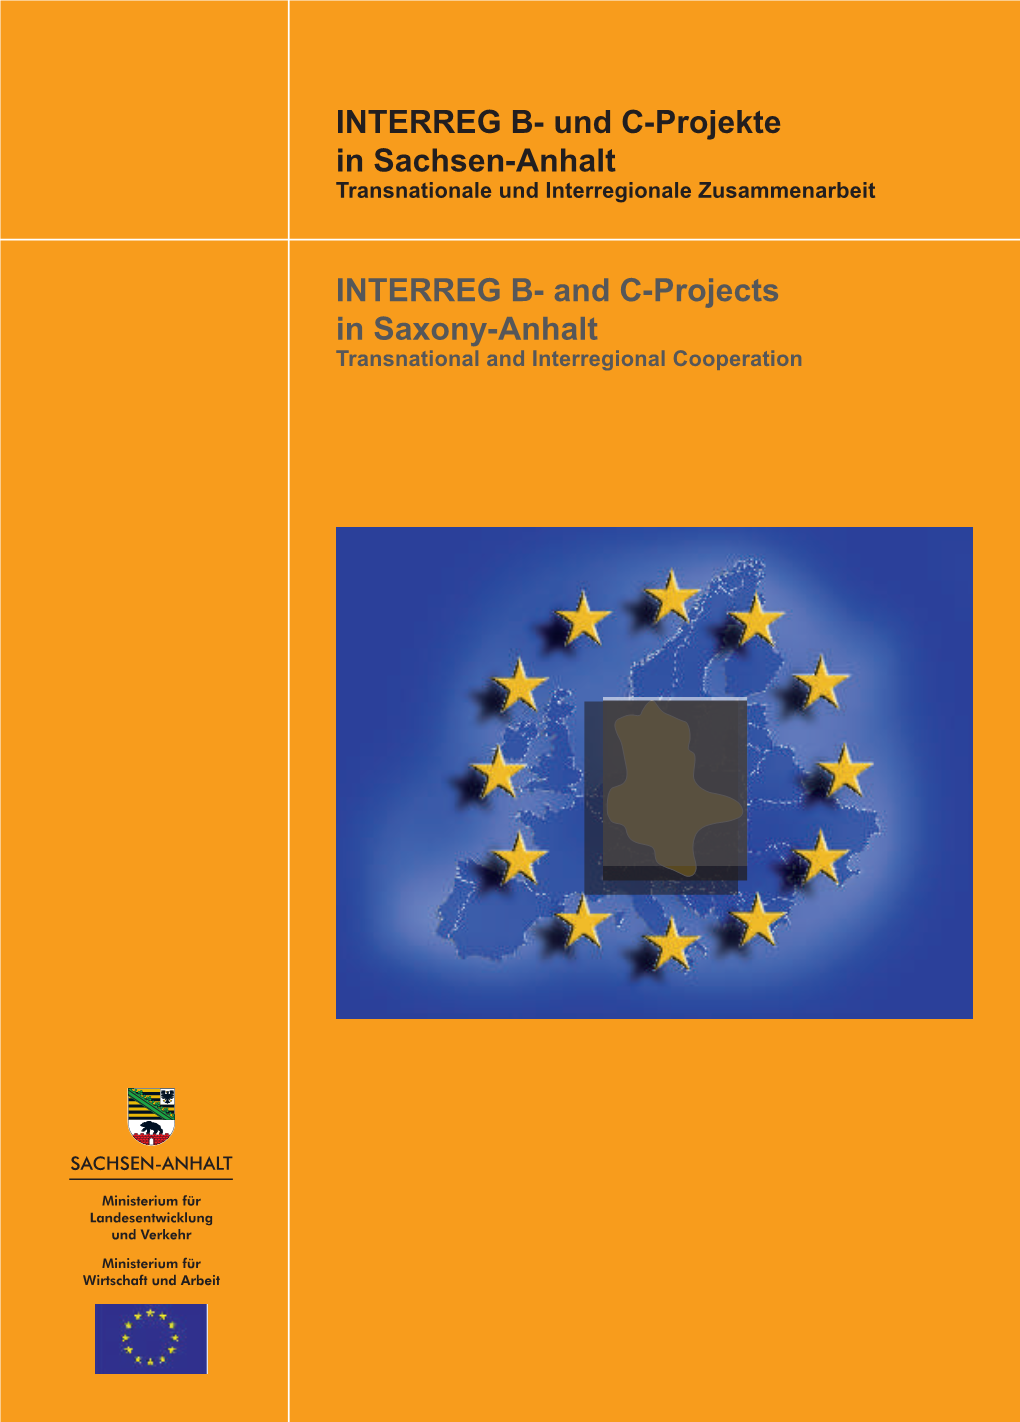 INTERREG B- and C-Projects in Saxony-Anhalt Transnational and Interregional Cooperation